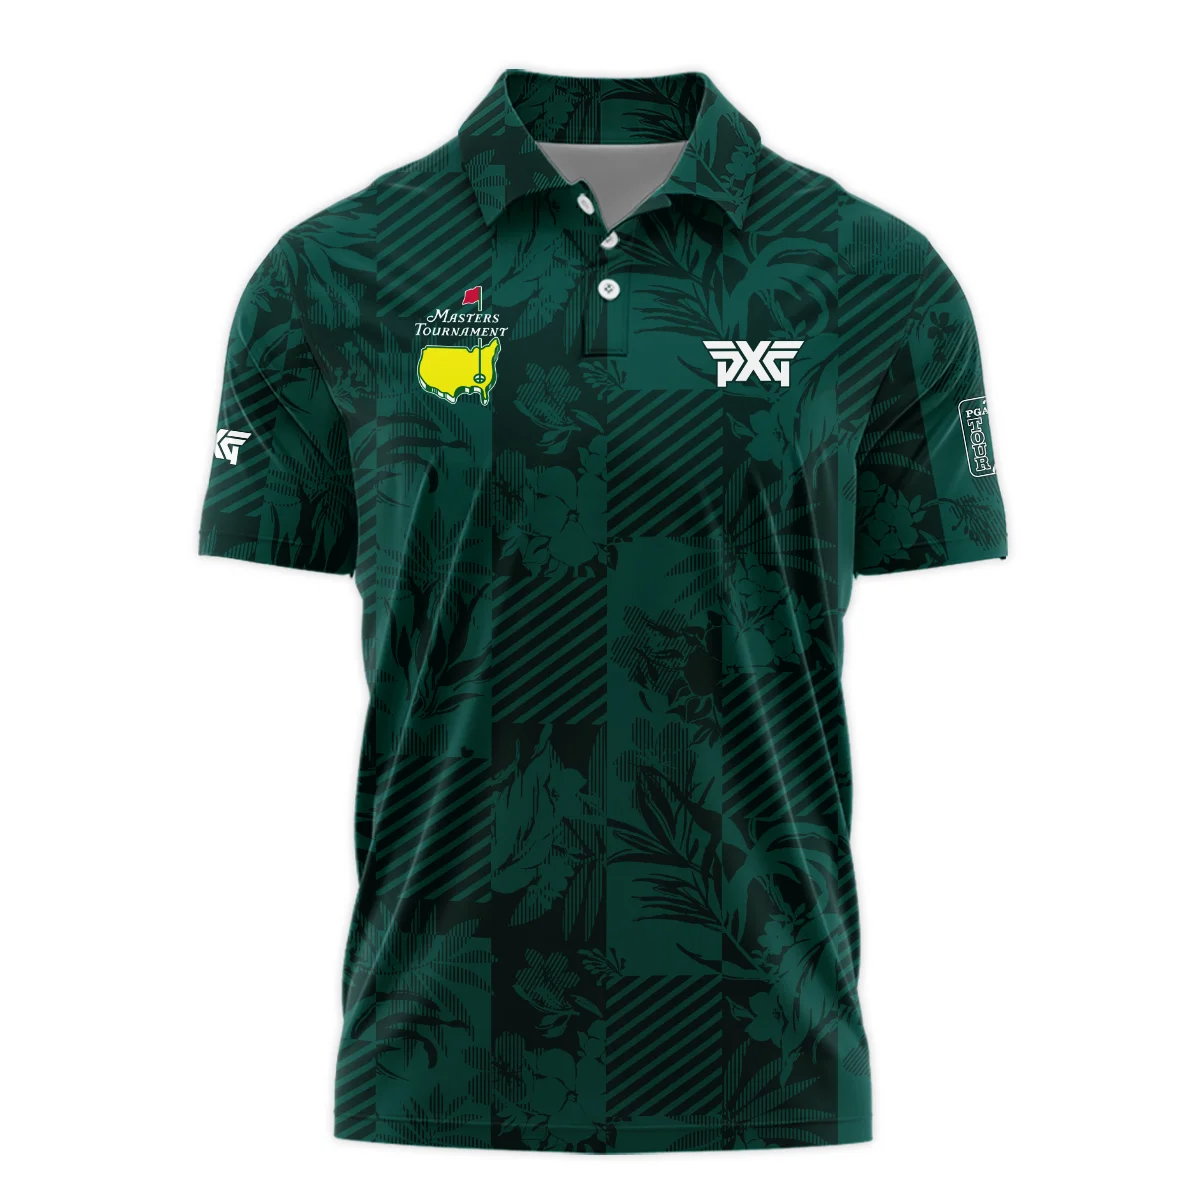 Tropical Leaves ,Foliage With Geometric Stripe Pattern Golf Masters Tournament Polo Shirt Style Classic Polo Shirt For Men